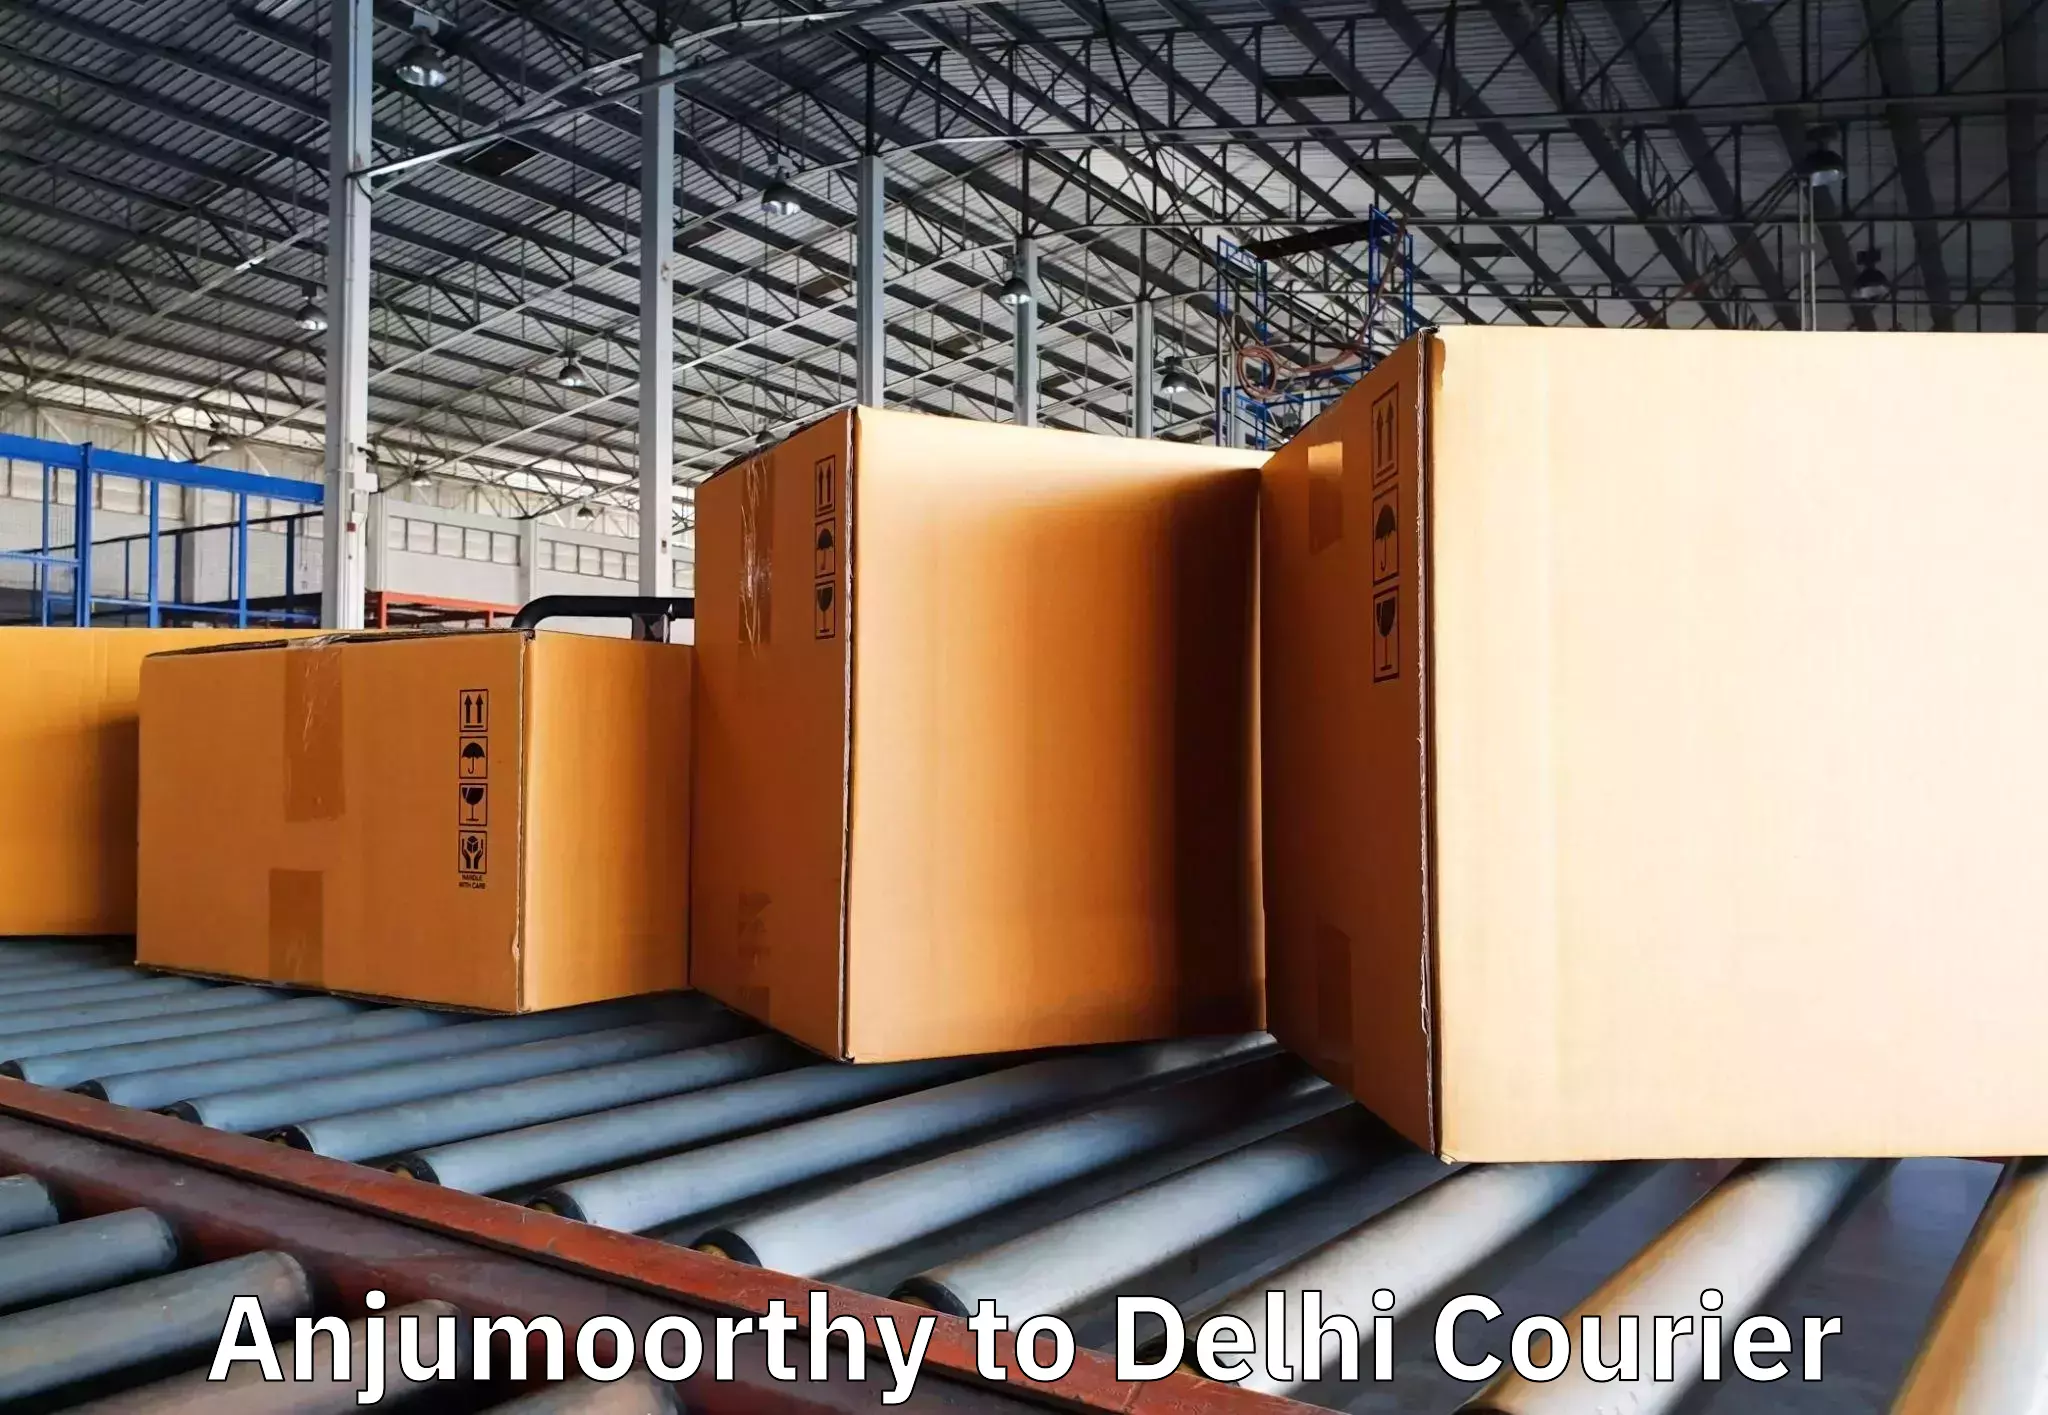 Reliable movers Anjumoorthy to Delhi Technological University DTU